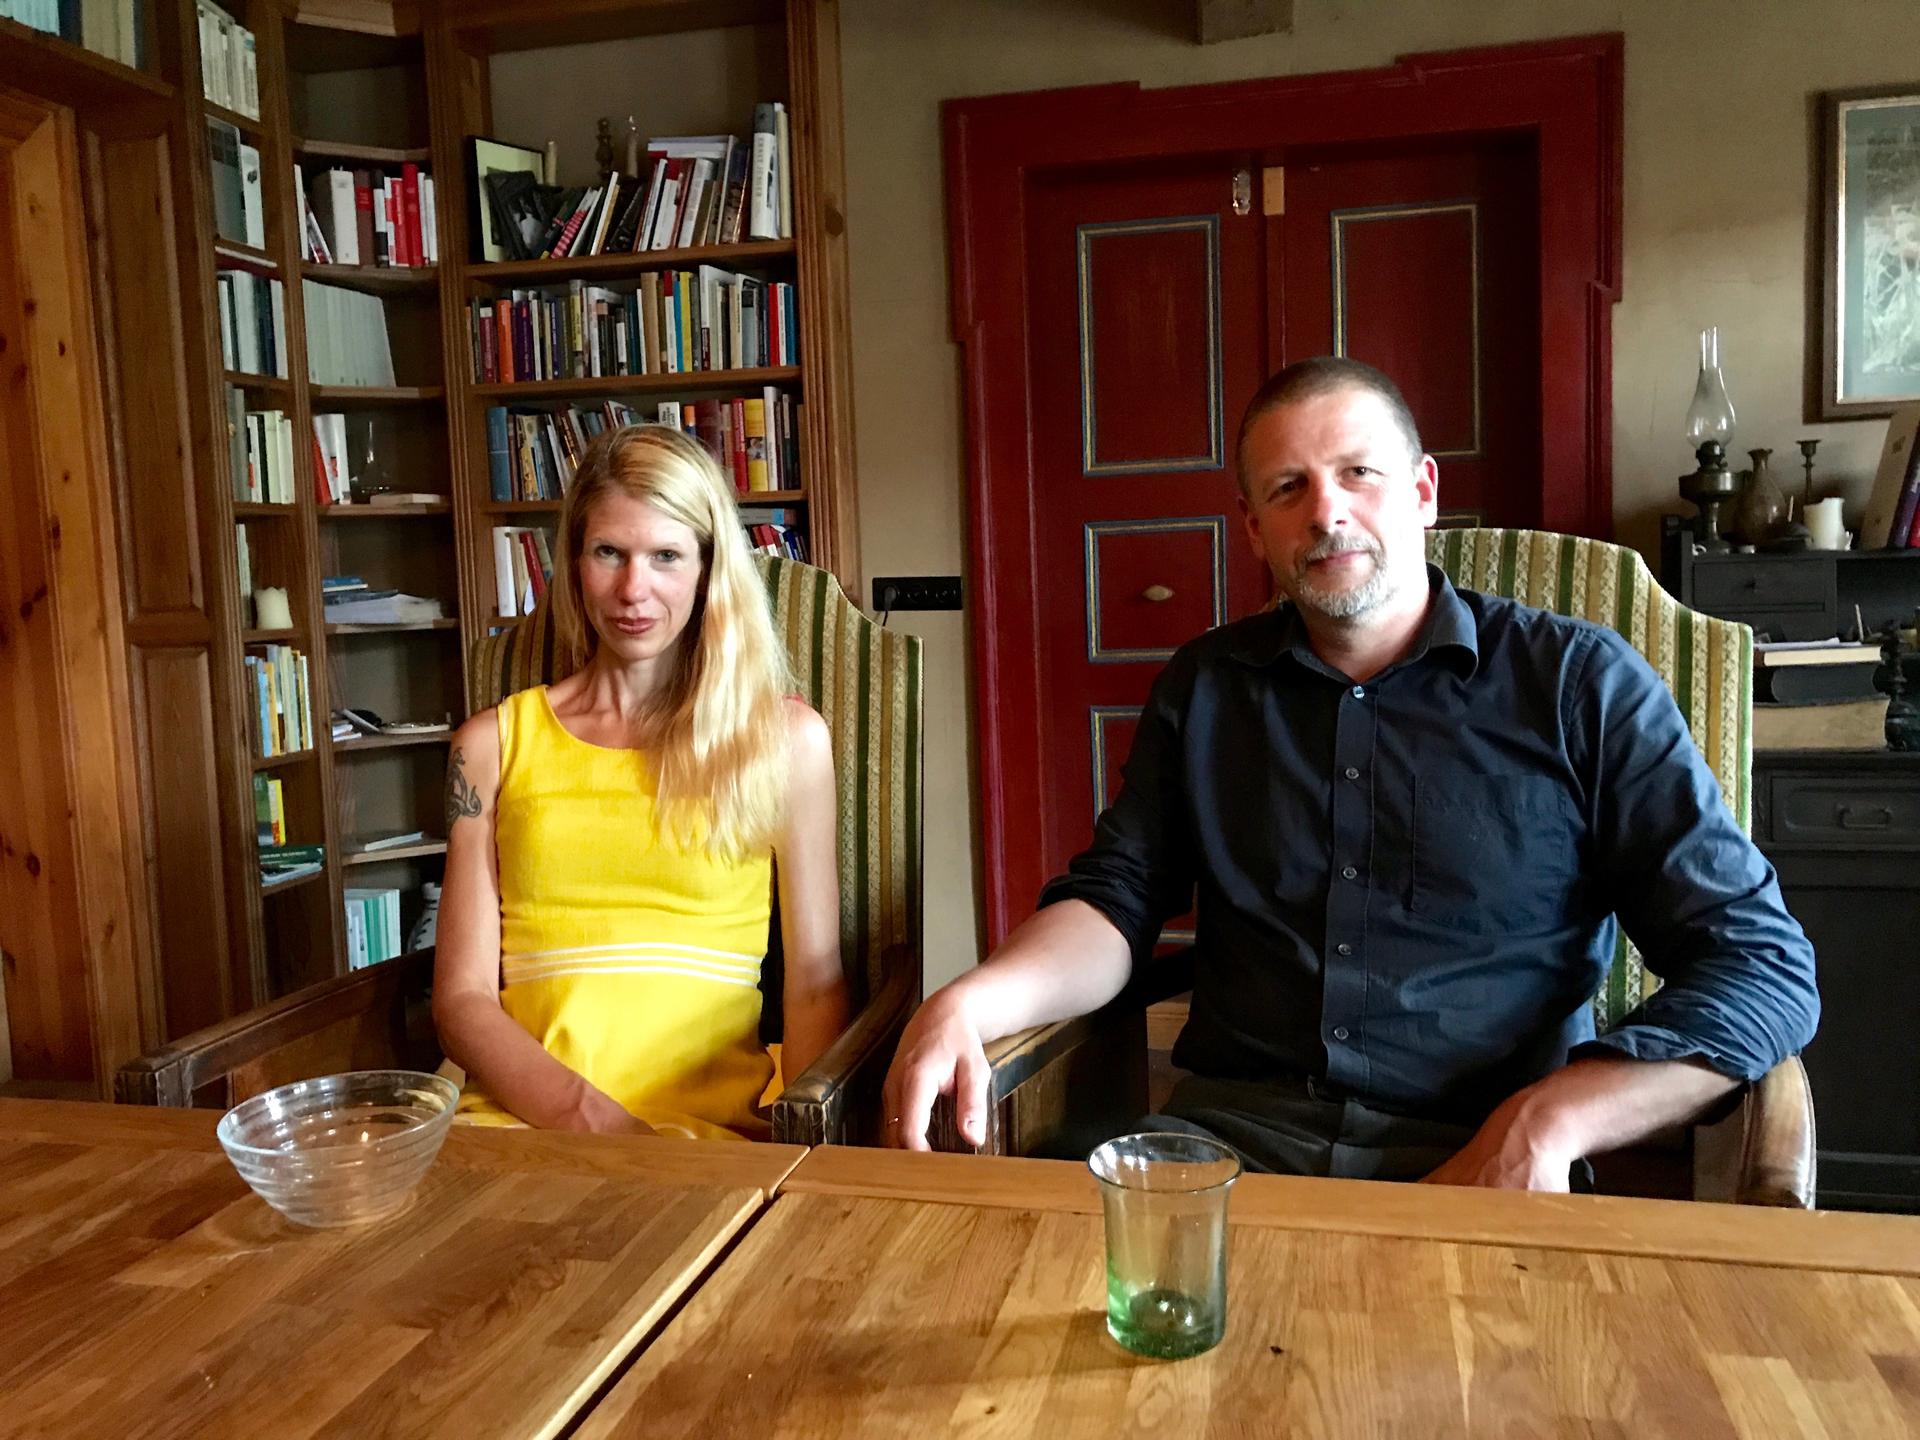 Right-wing activist and publisher Götz Kubitschek with his wife, Ellen Kositza, at their home in the German state of Saxony-Anhalt.